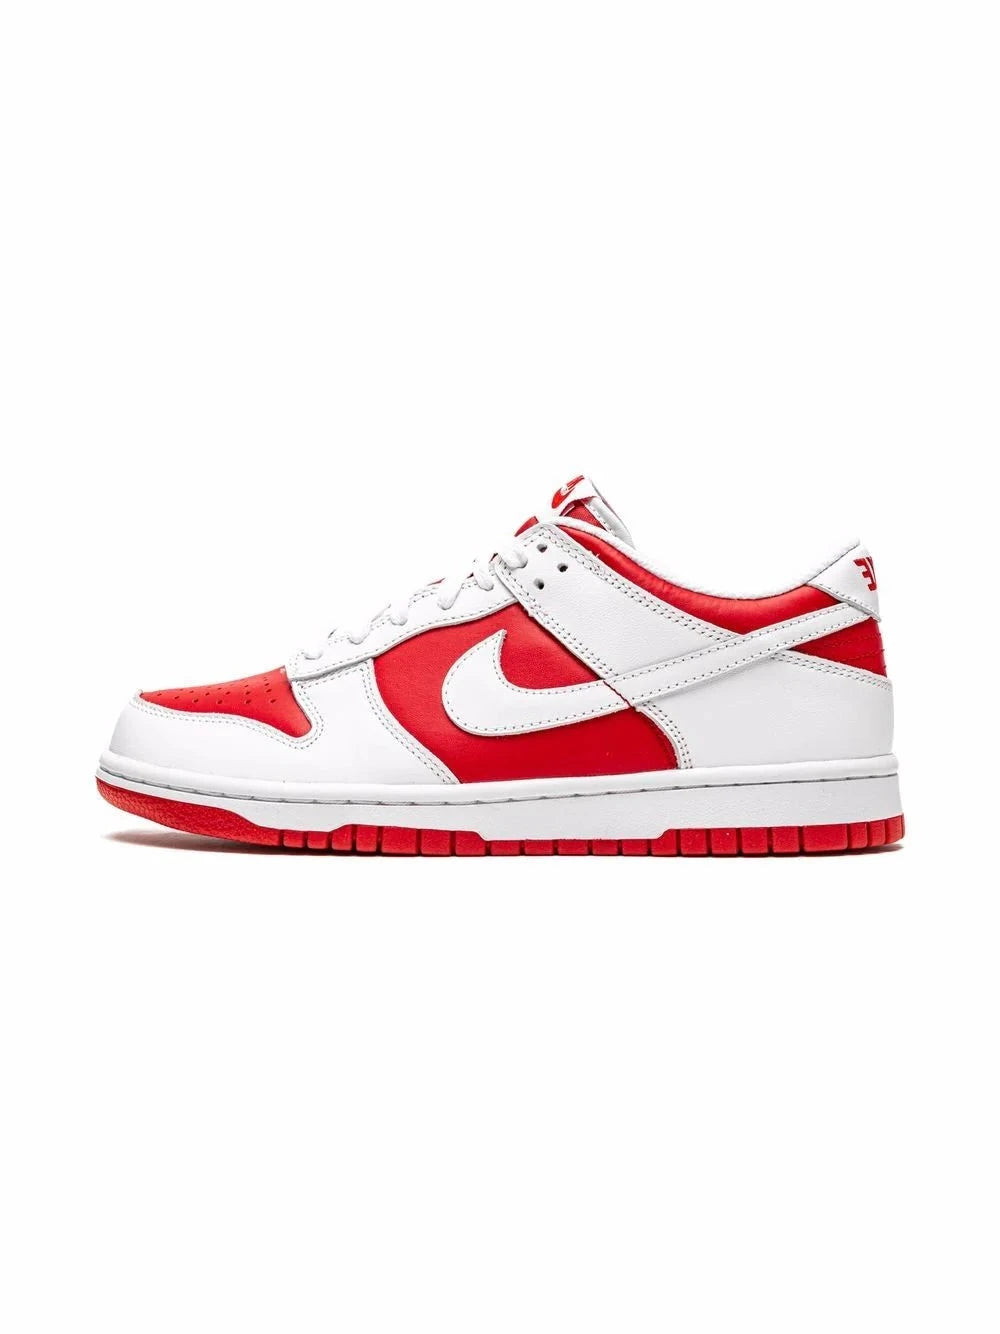 NIKE DUNK LOW - CHAMIONSHIP RED